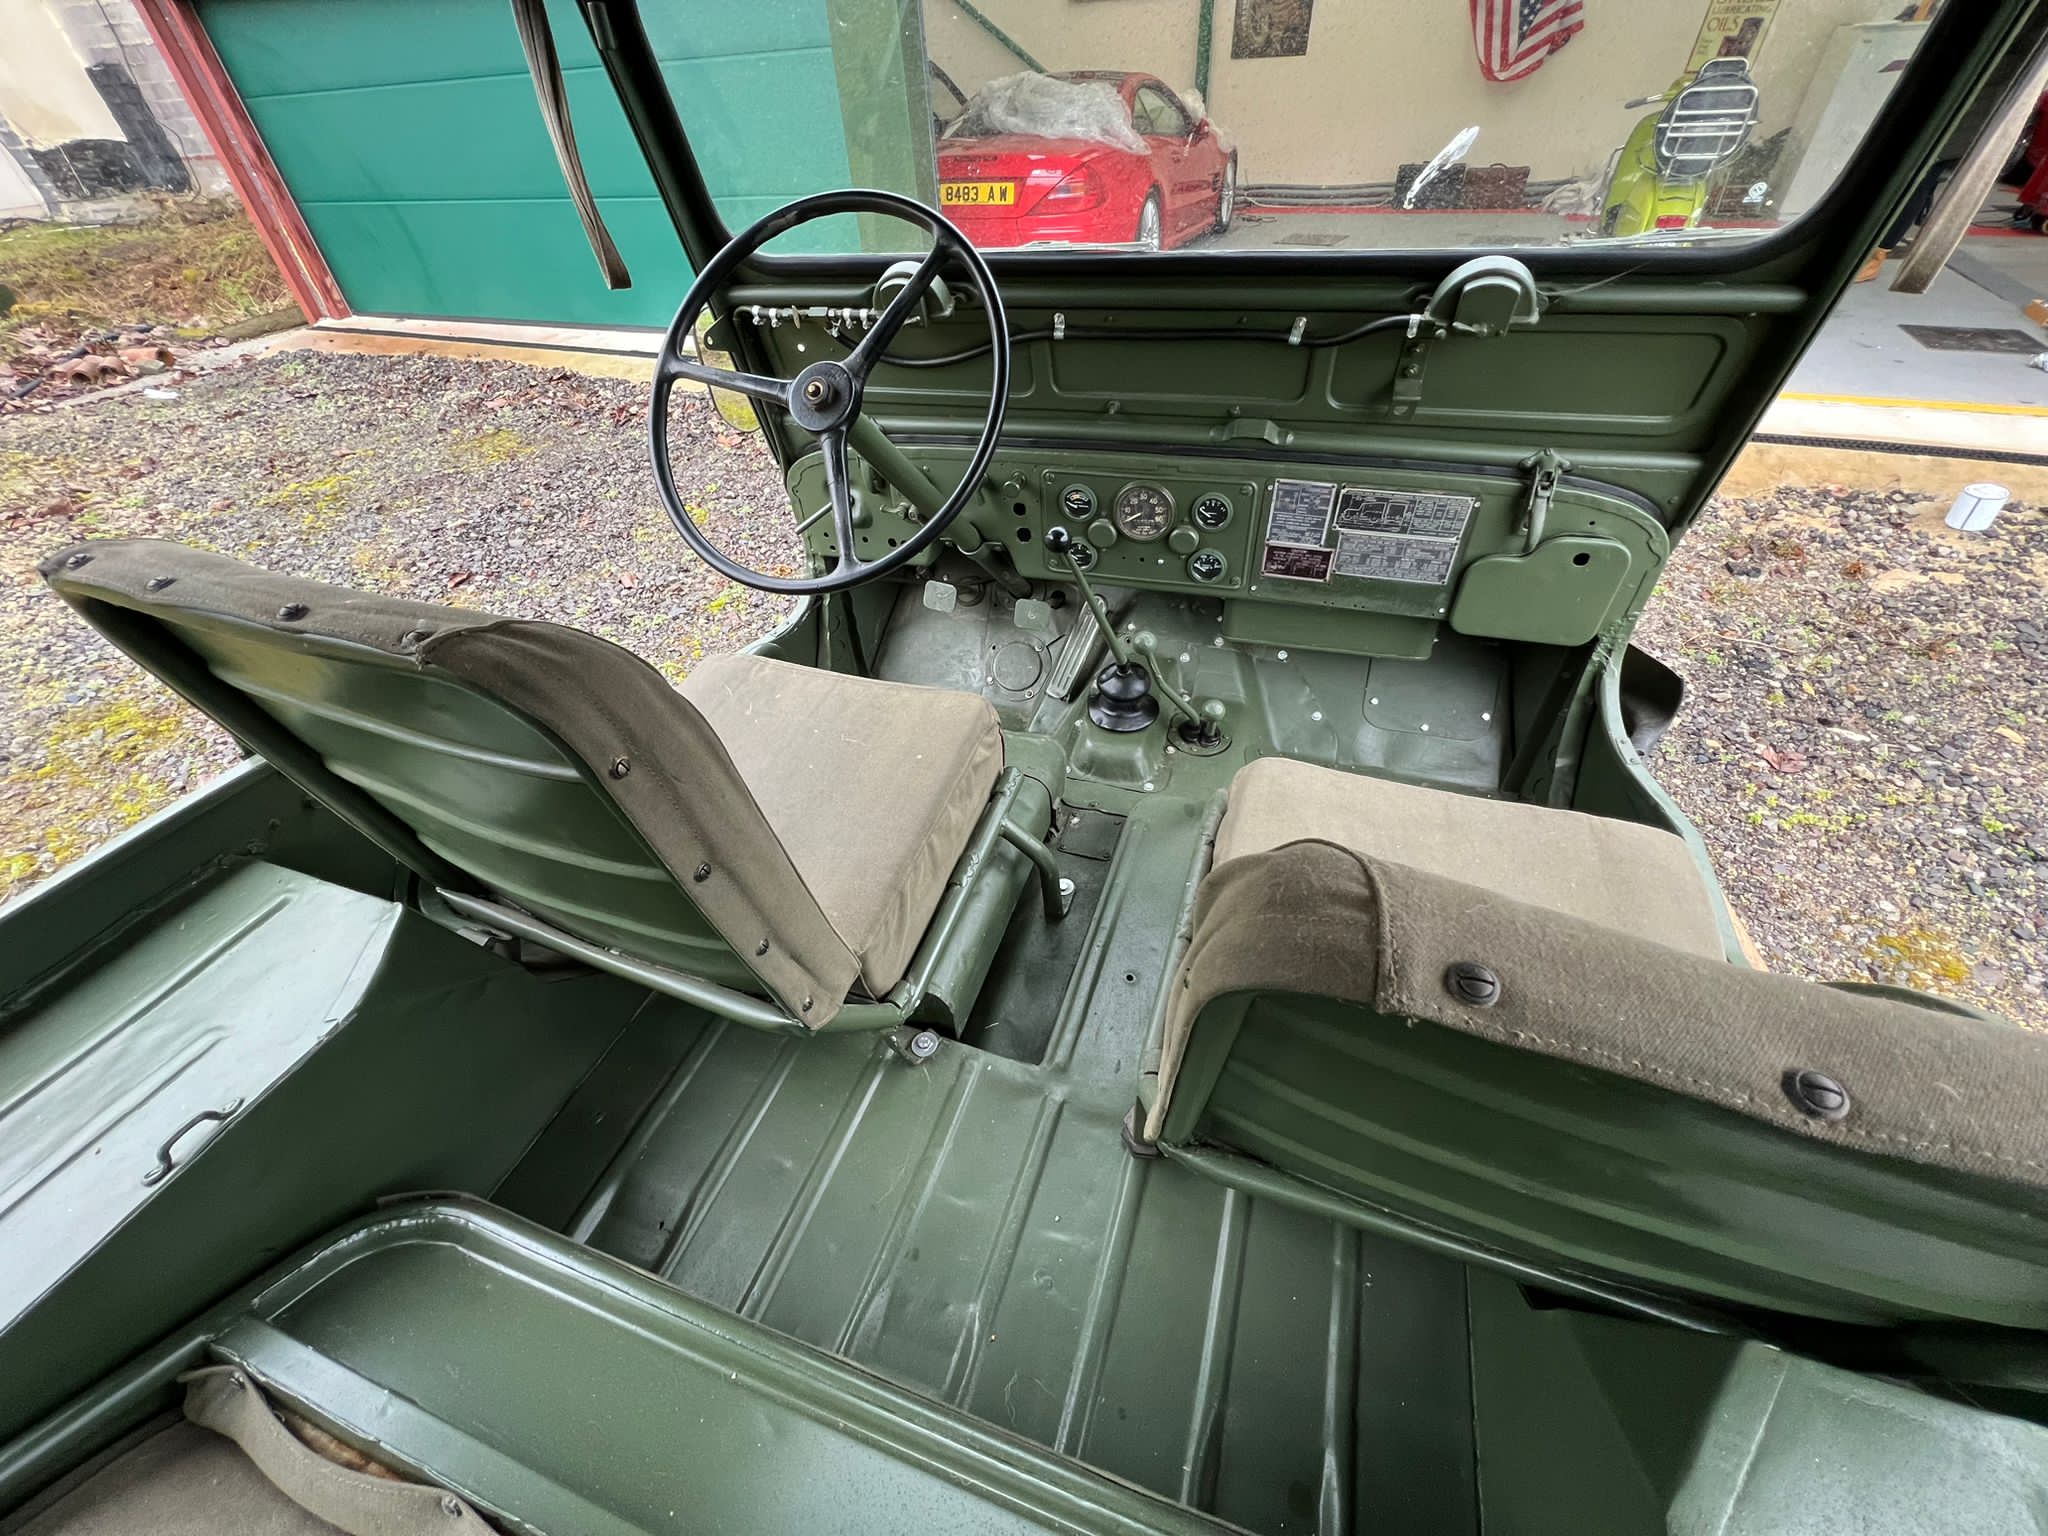 1945 Willys Jeep - Military Vehicle - Restored and raring to go... - Image 12 of 13